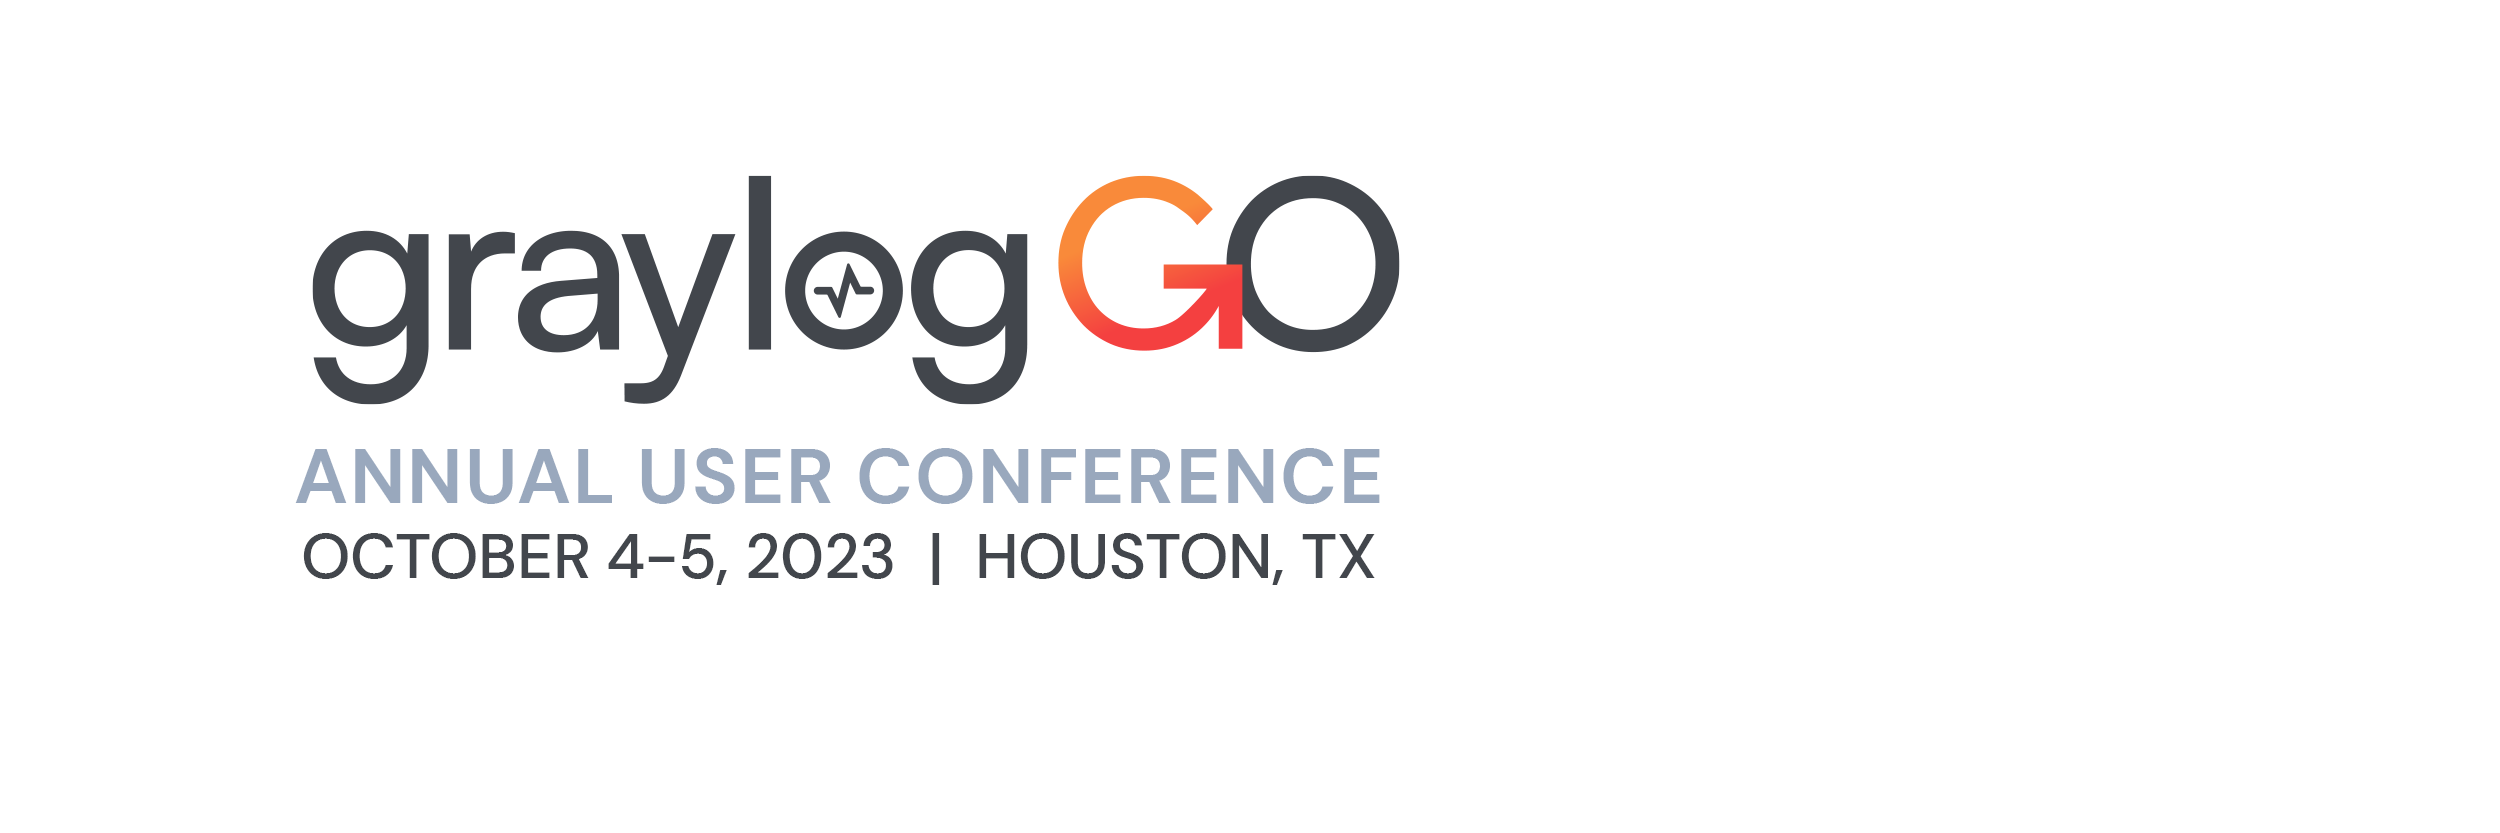 Graylog Go Call for Papers